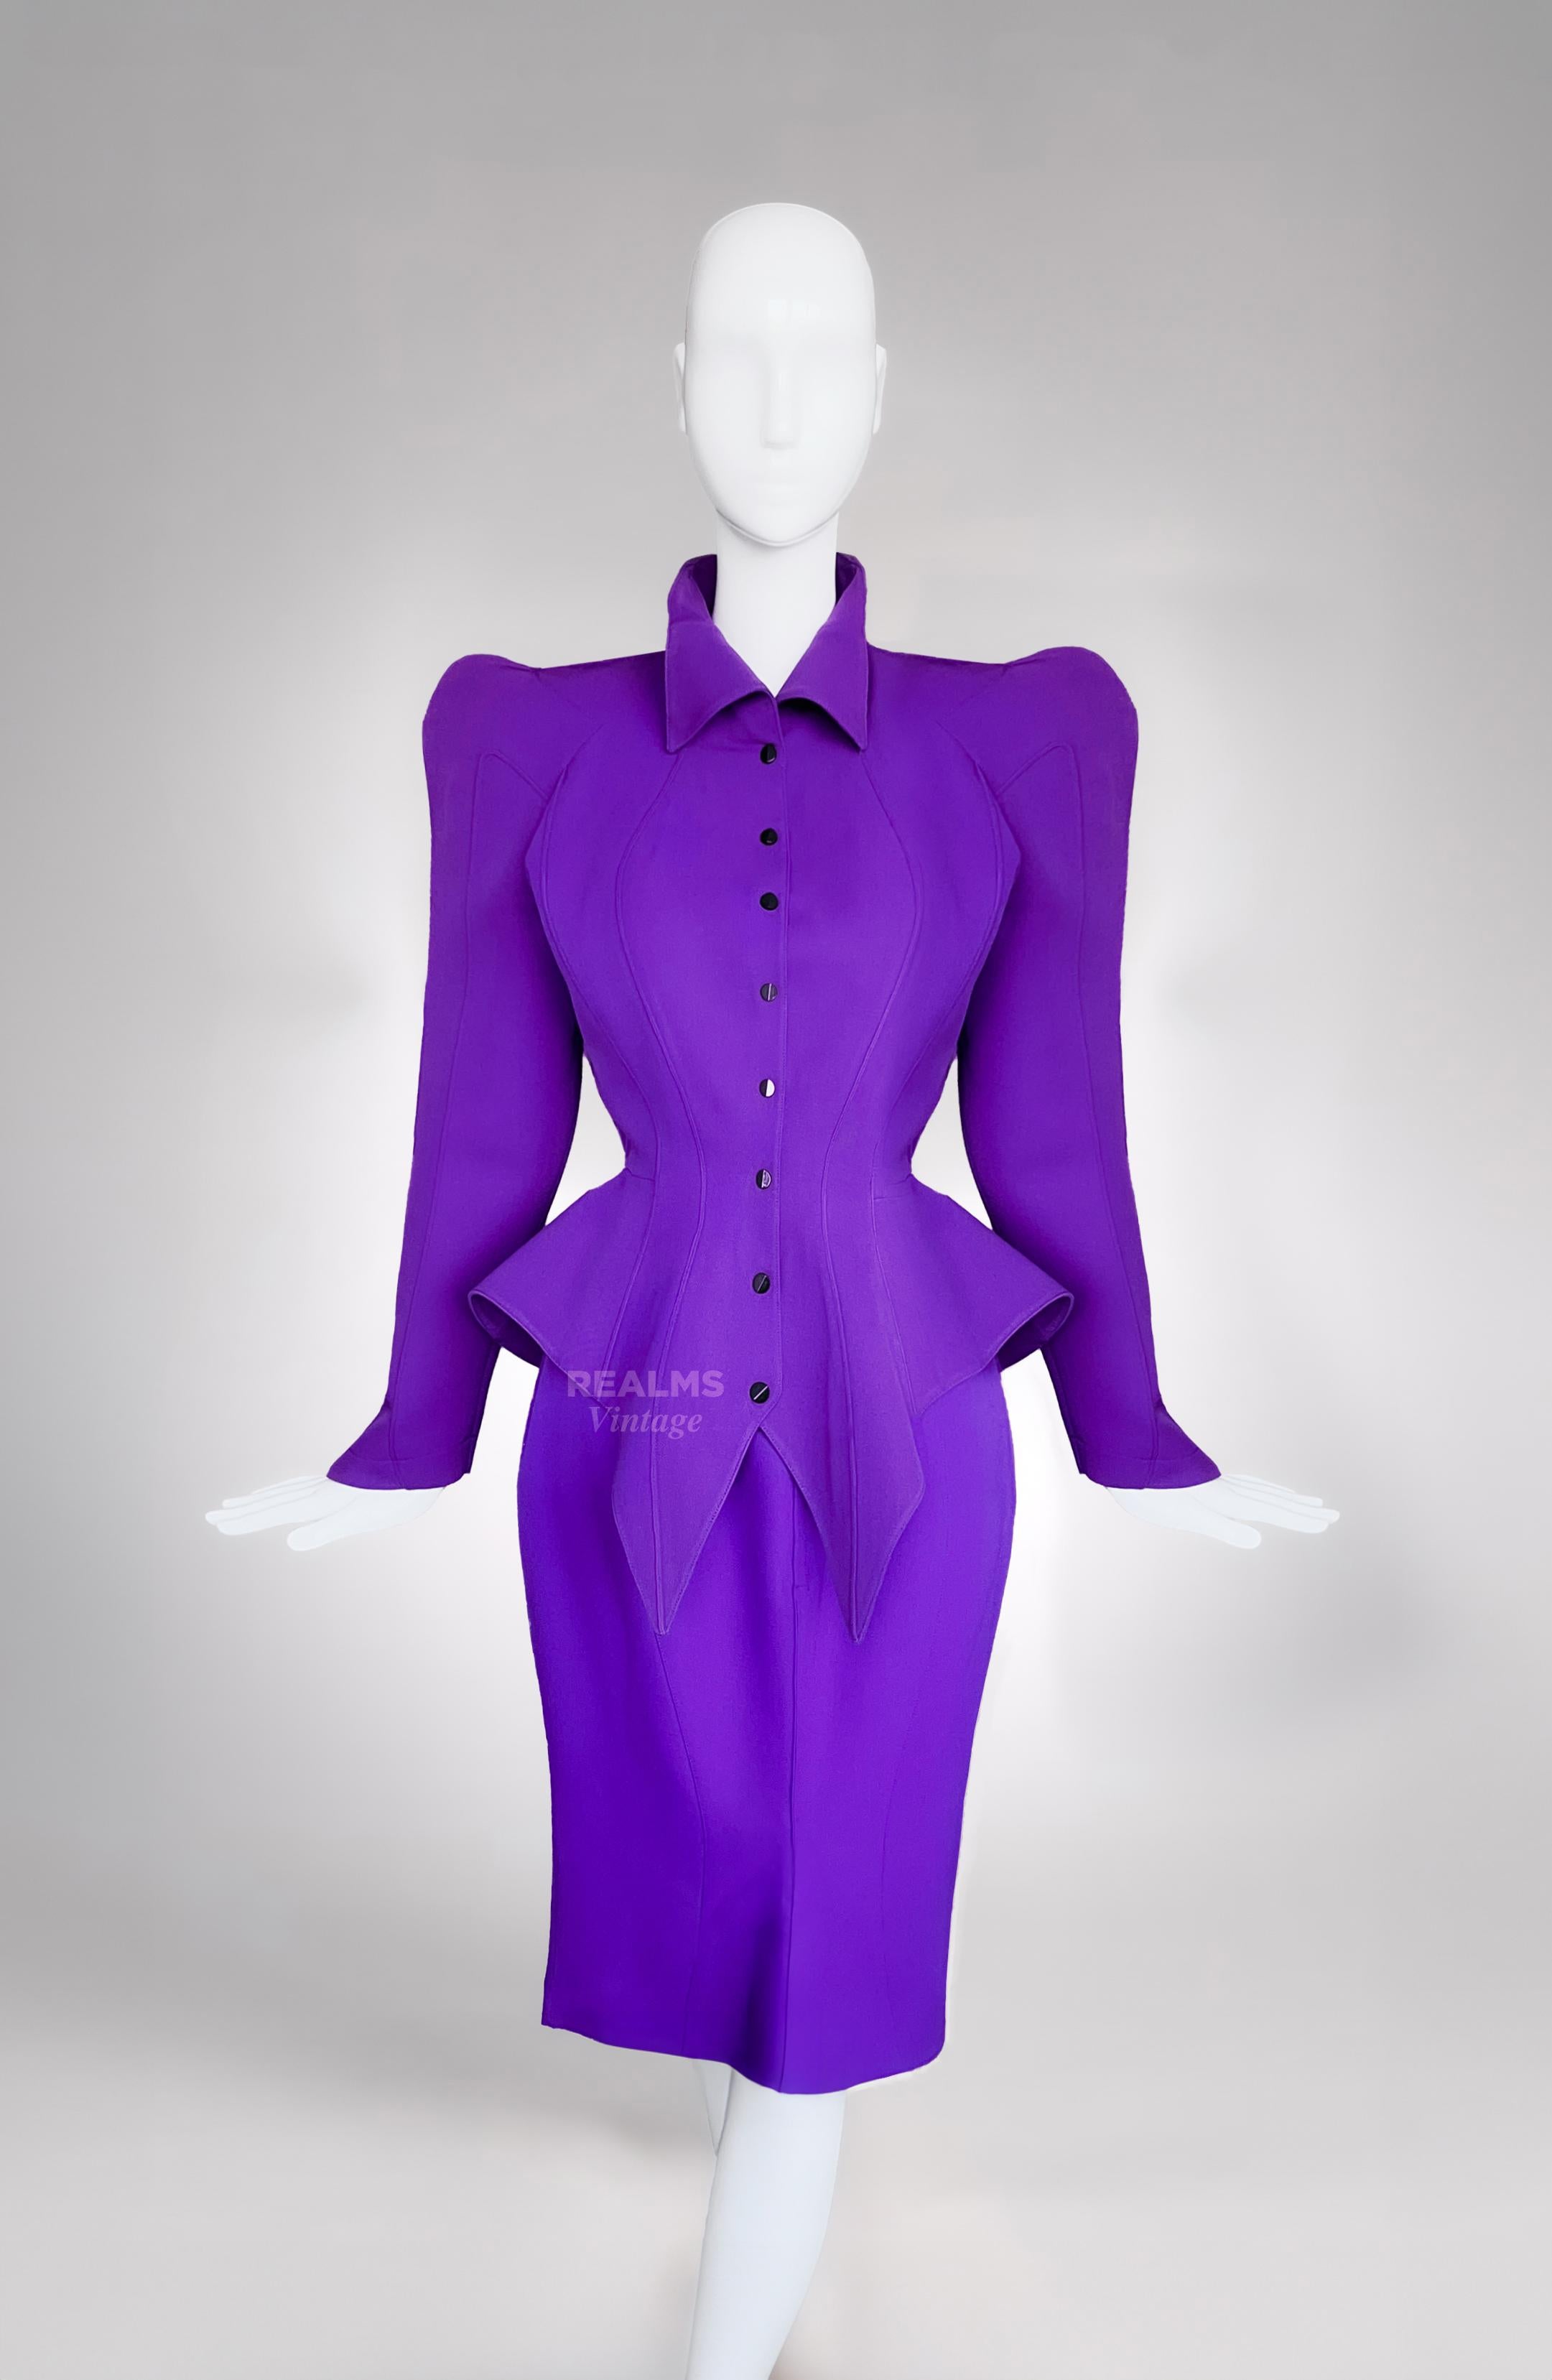 Women's Iconic Thierry Mugler LES INFERNALES Suit 1988/89 Jacket Skirt For Sale